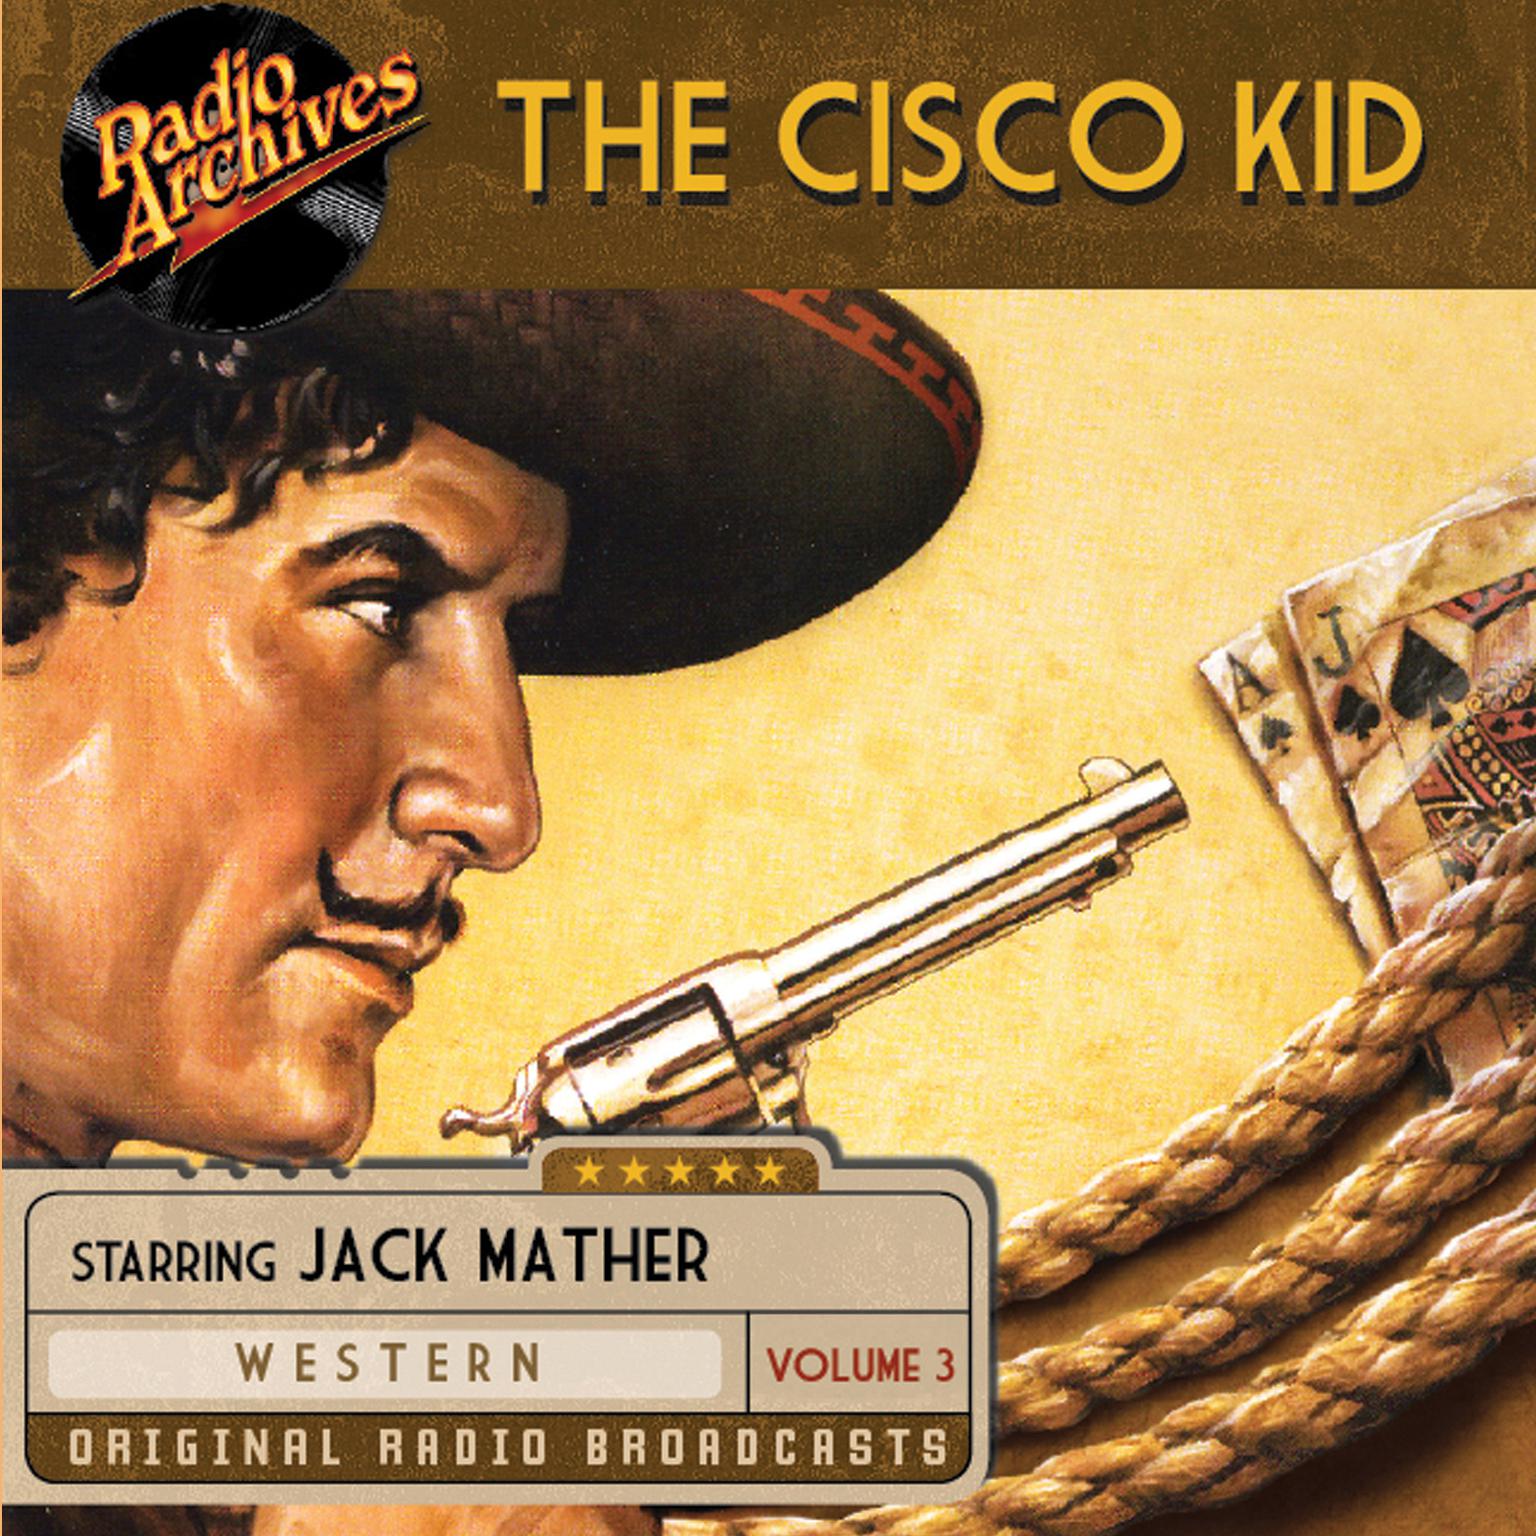 The Cisco Kid, Volume 3 Audiobook, by O. Henry